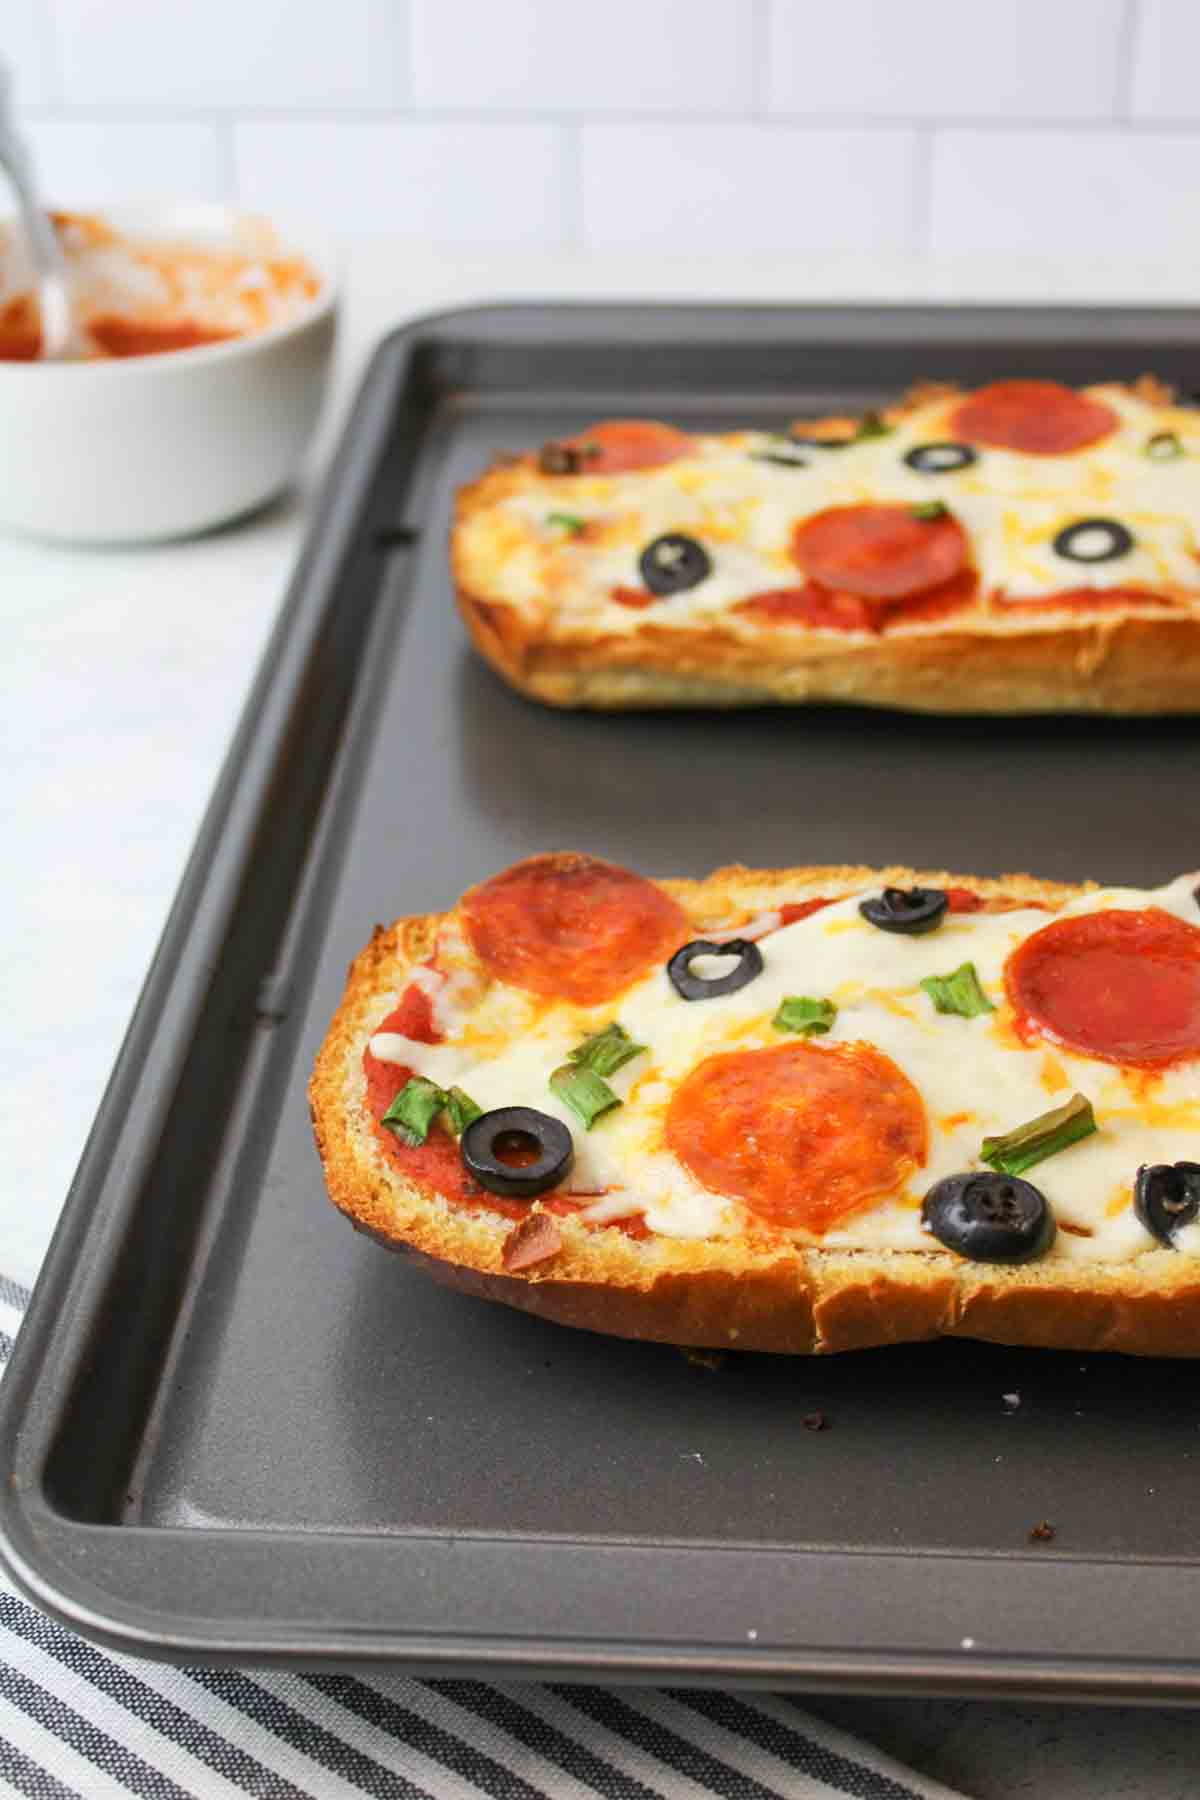 two baked halves of french bread pizza on a baking sheet with a bowl of sauce in the background.